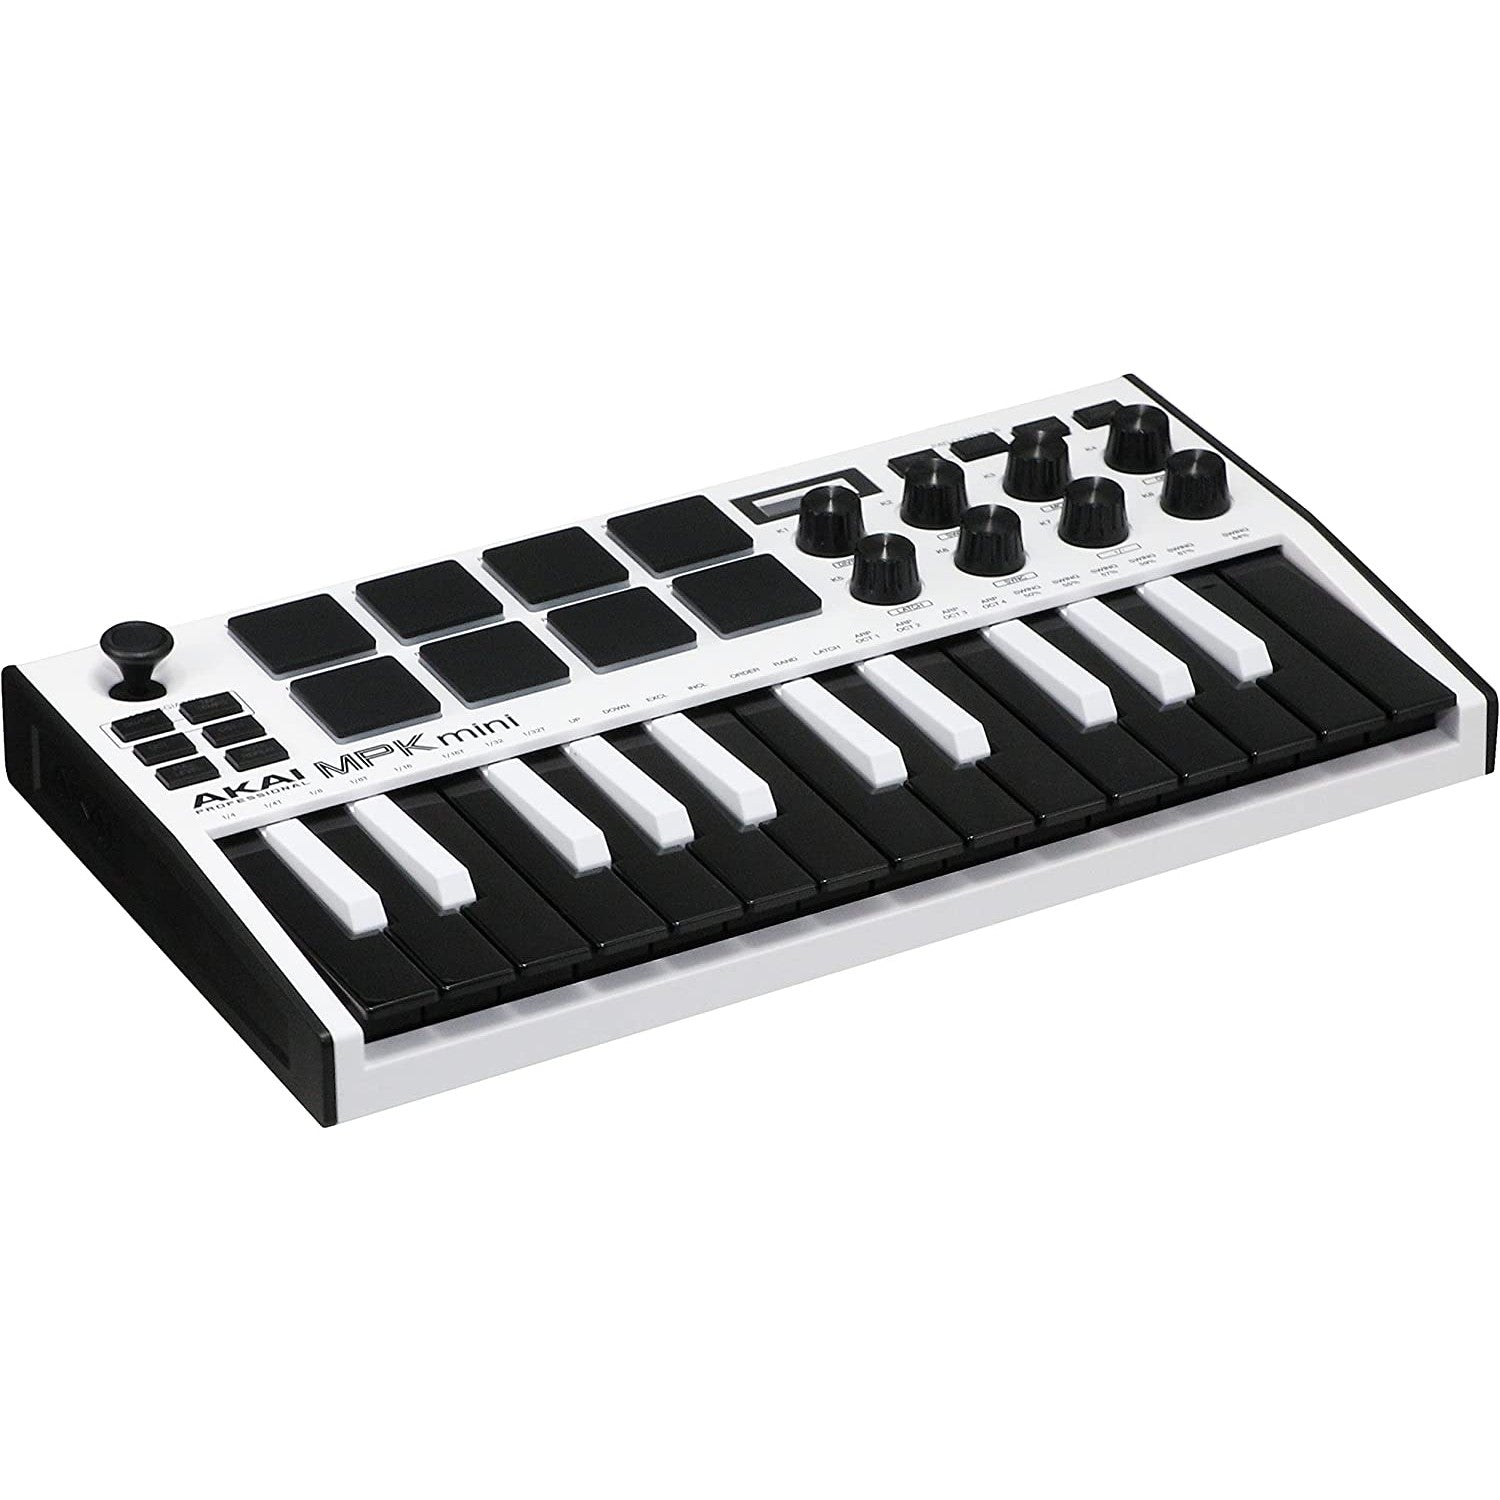 Introducing the MPK Mini MK3 – Your hit song starts here